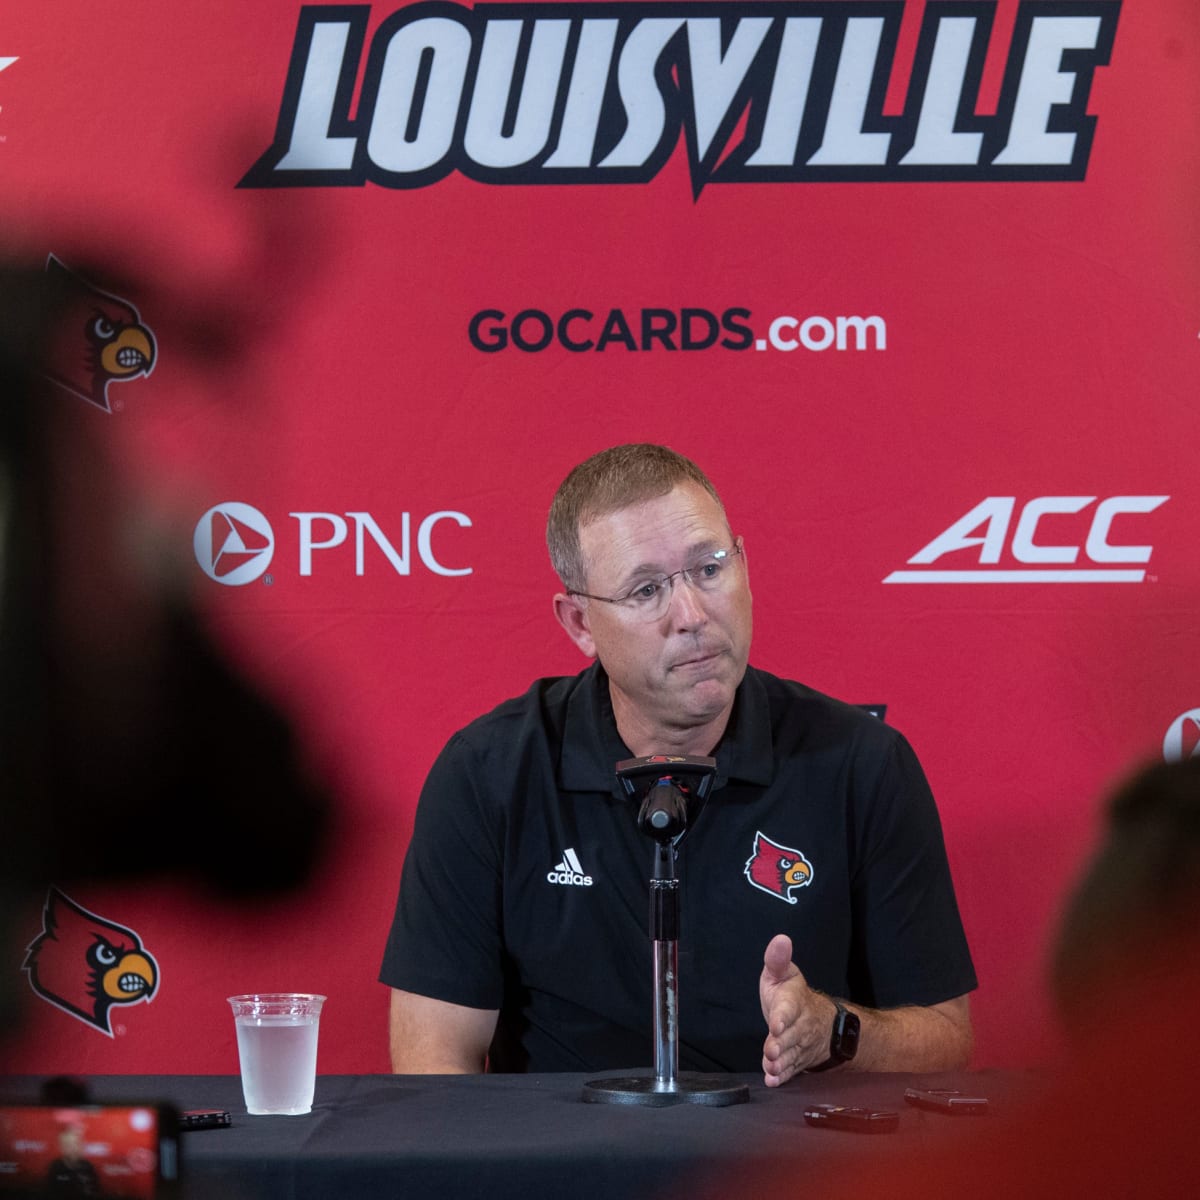 Coaching Carousel Roundup & Rumblings: With Scott Satterfield to